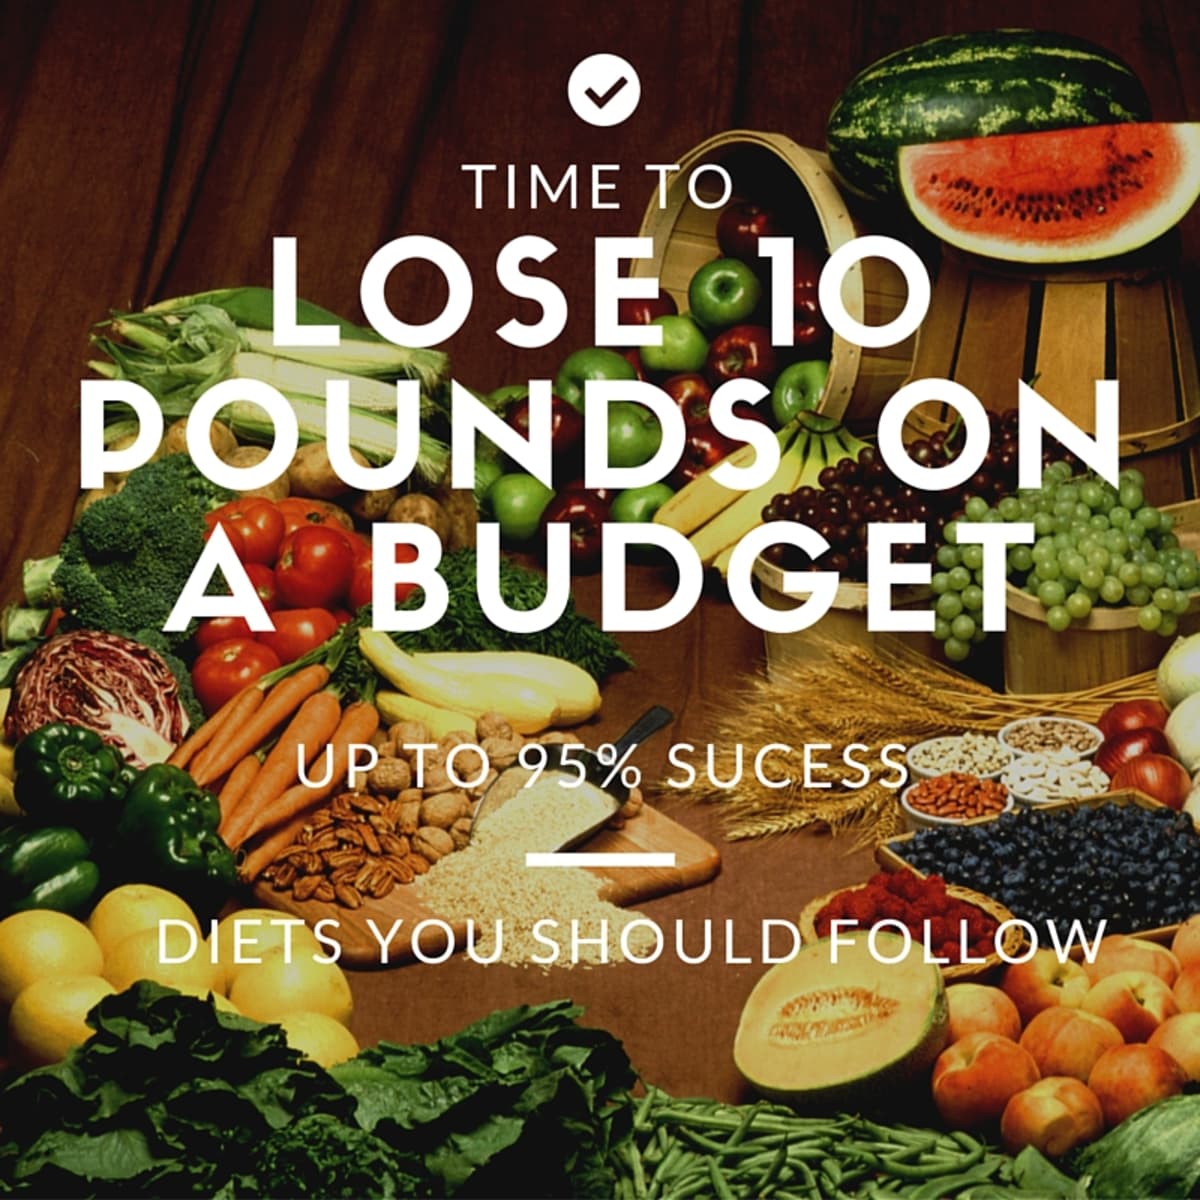 Quick Weight Loss: How to Lose 10 Pounds Fast